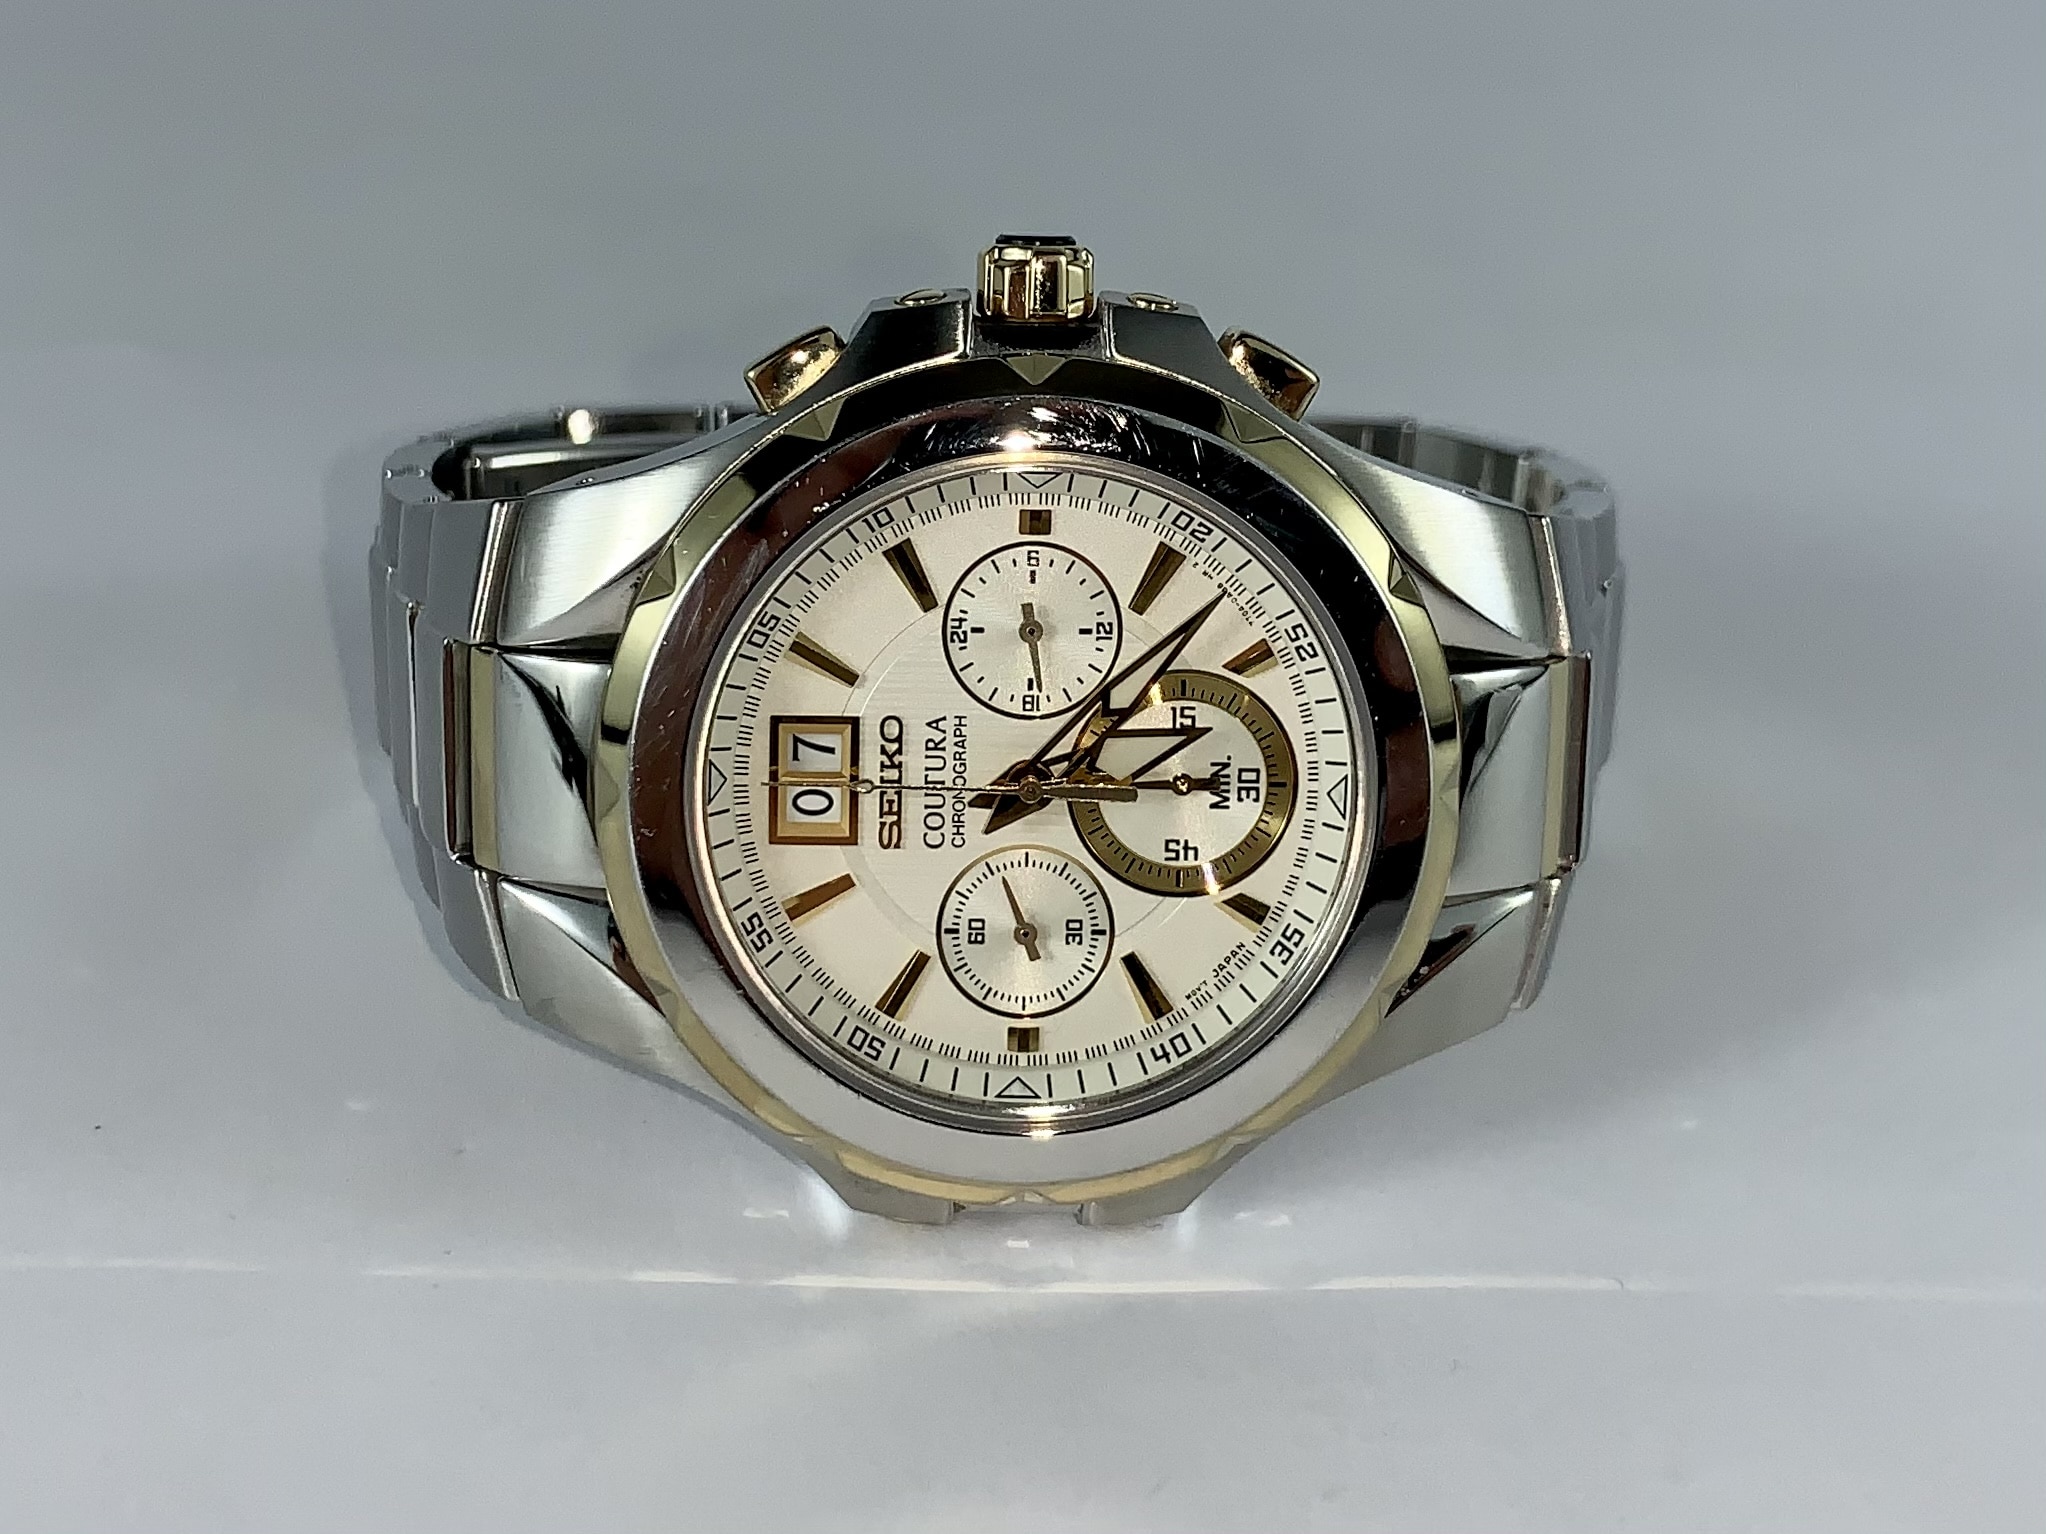 Seiko Coutura Two-Tone Chronograph Watch 7T04-0AB0 - Barry's Pawn and ...